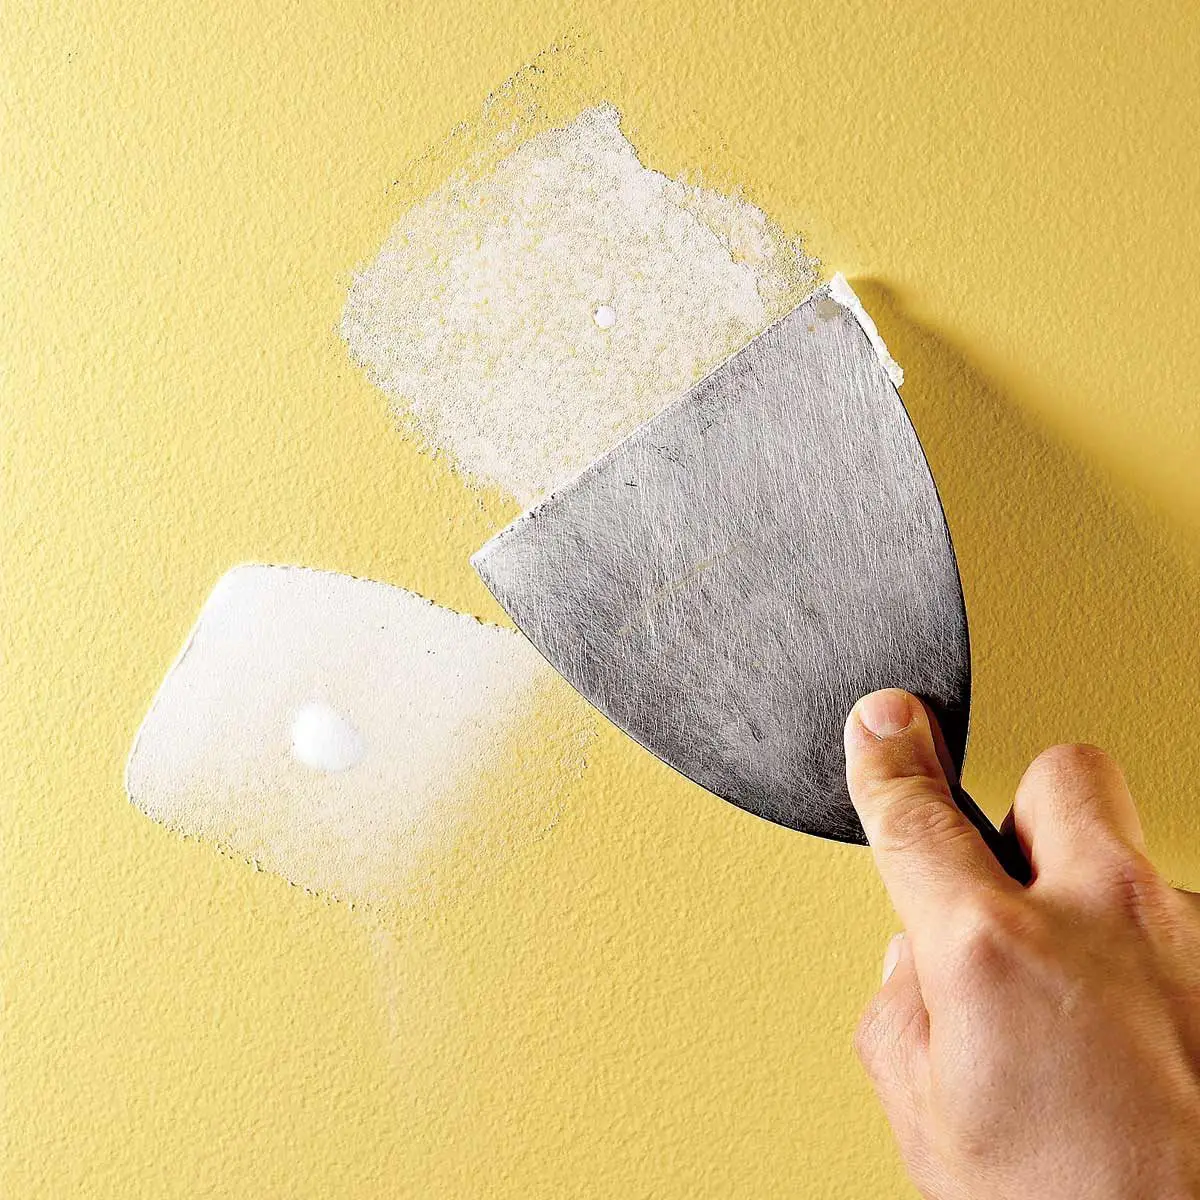 Drywall Repair: How to Patch a Hole in the Wall (DIY)